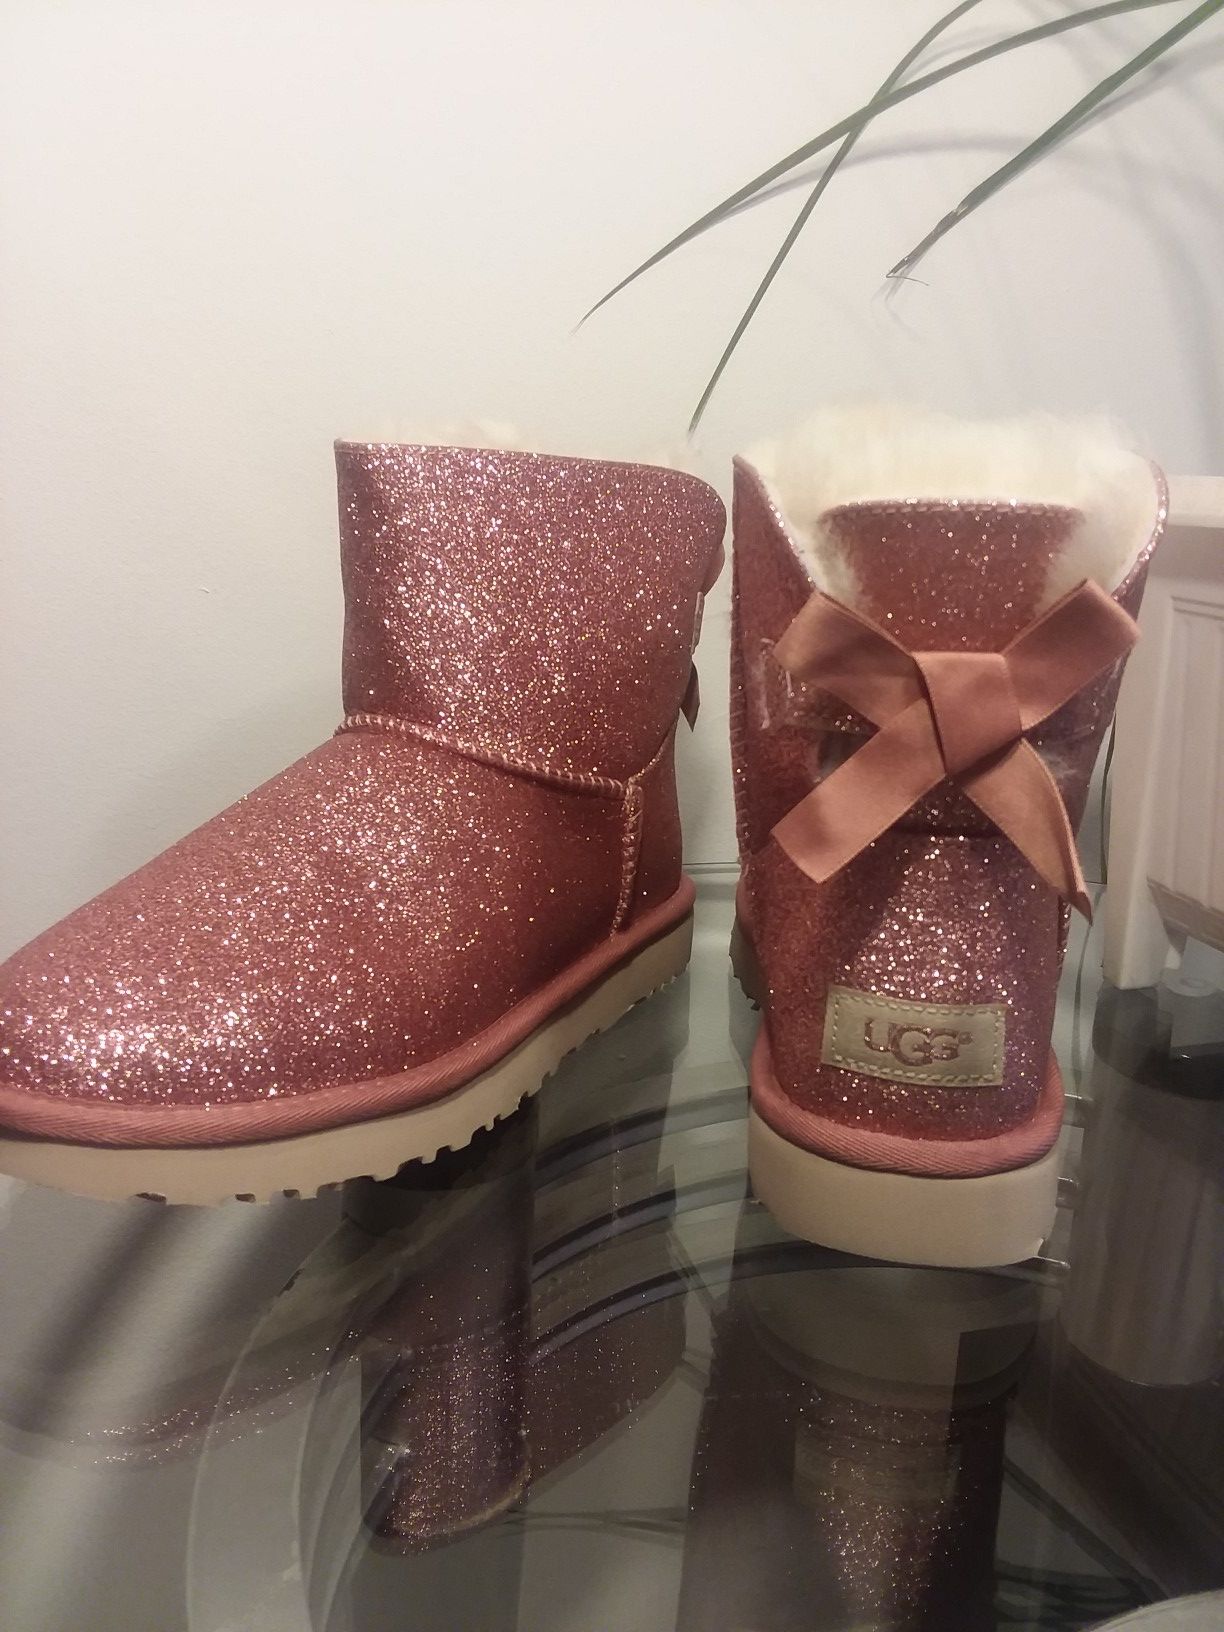 Ugg mini Bailey bow pink glitter sparkle boots women's